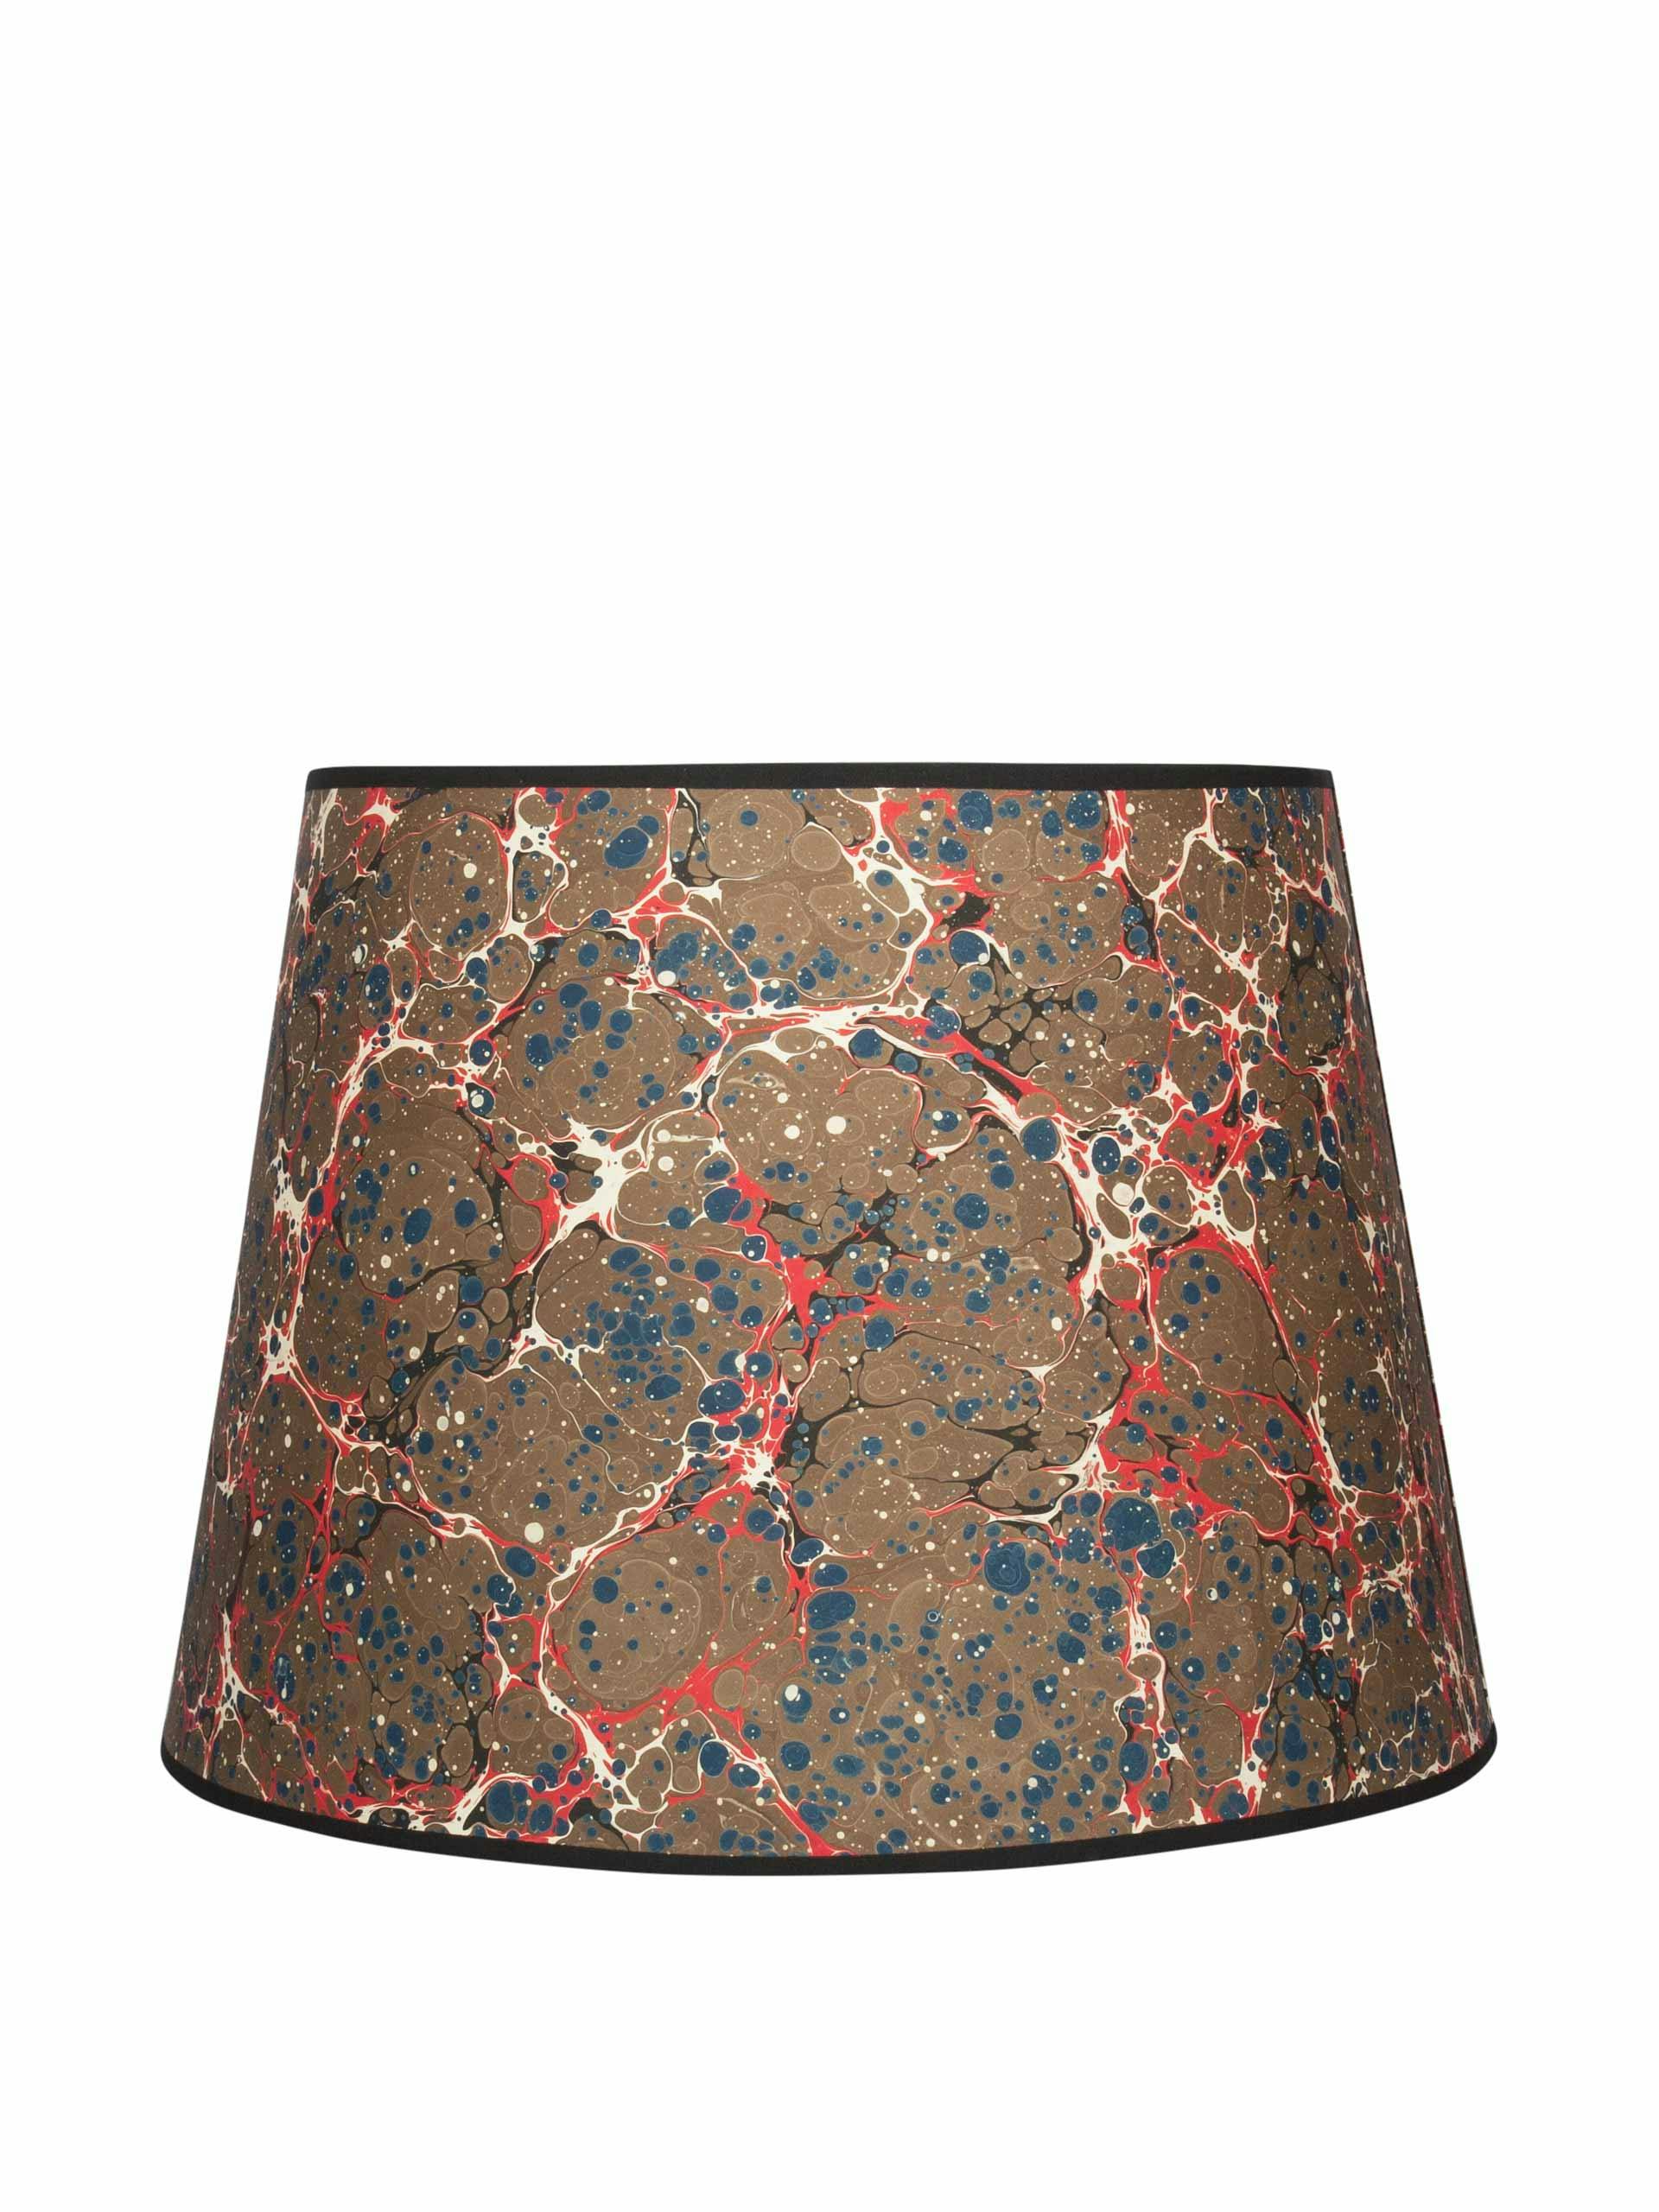 Light brown marbled lampshade